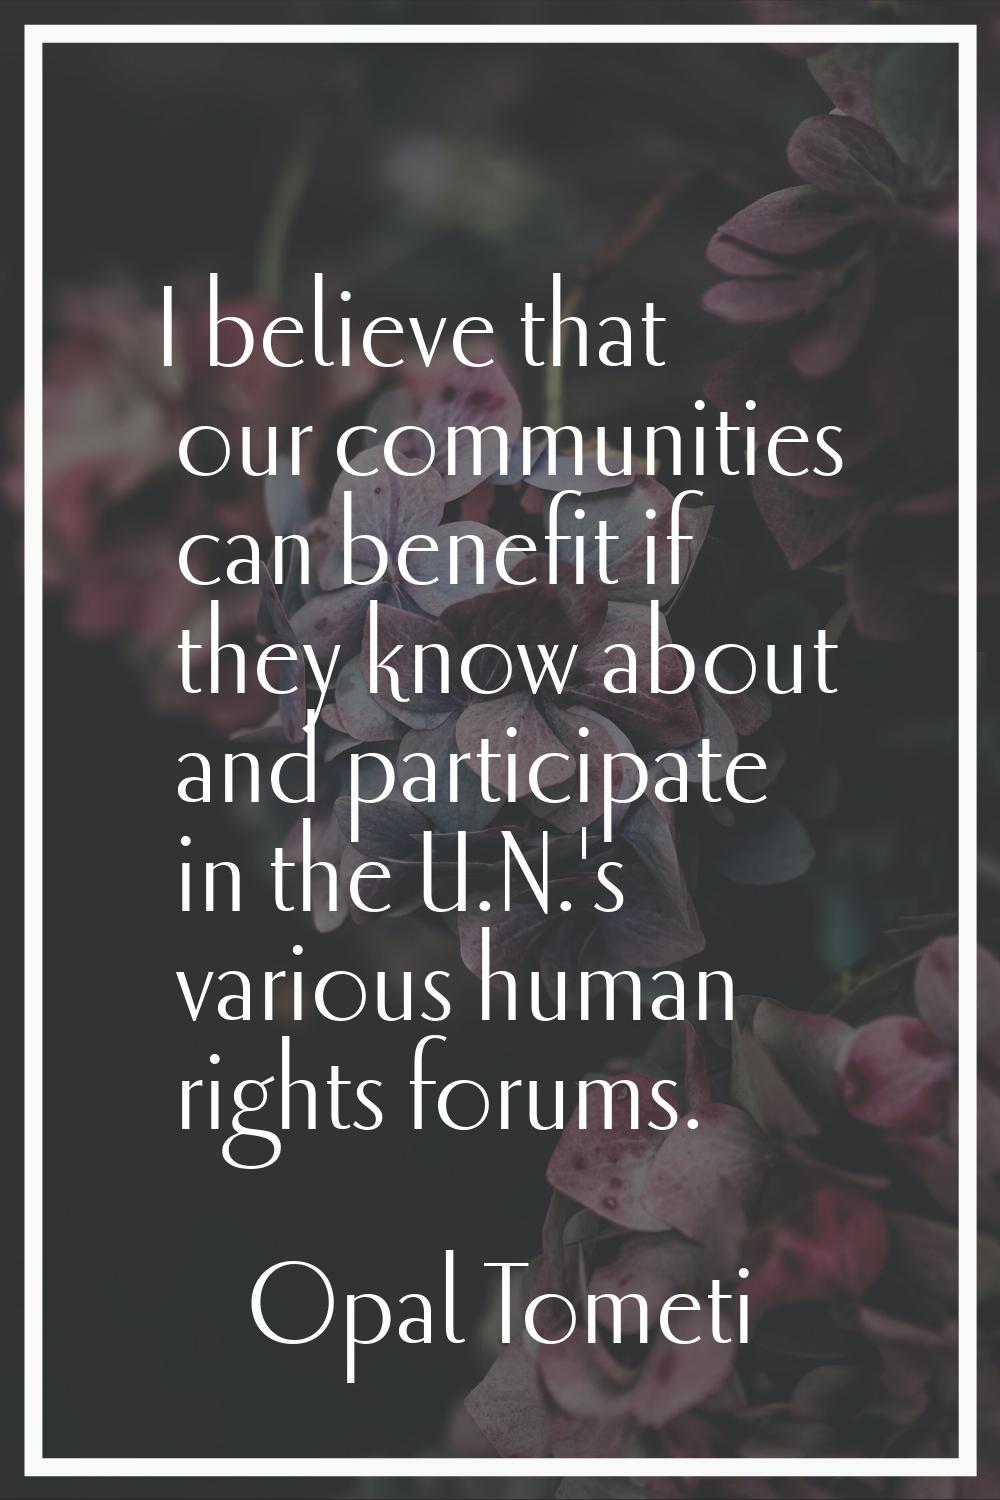 I believe that our communities can benefit if they know about and participate in the U.N.'s various